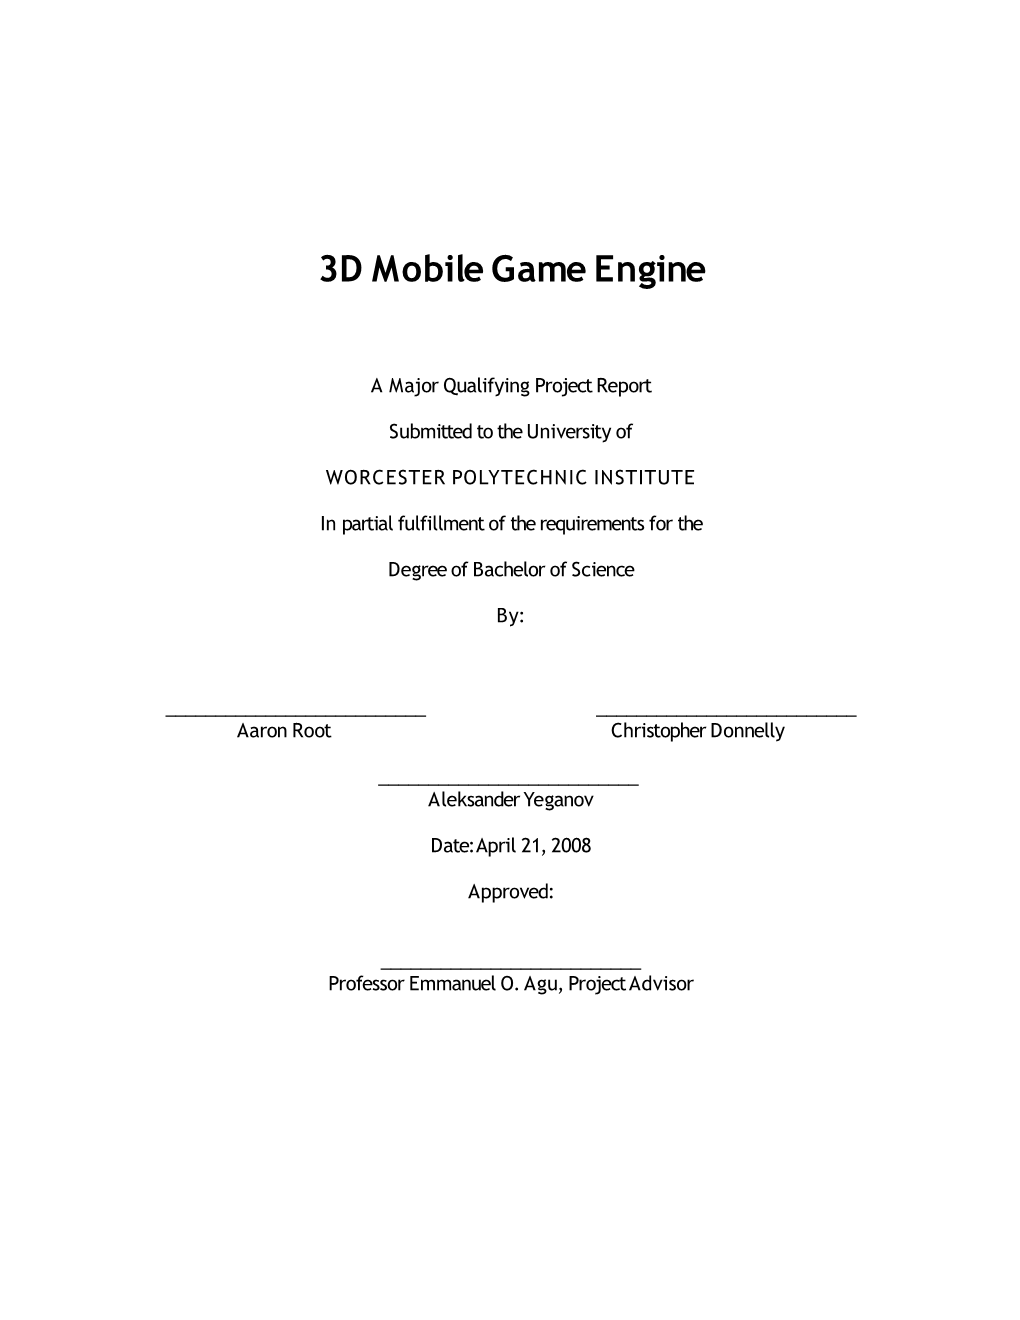 3D Mobile Game Engine